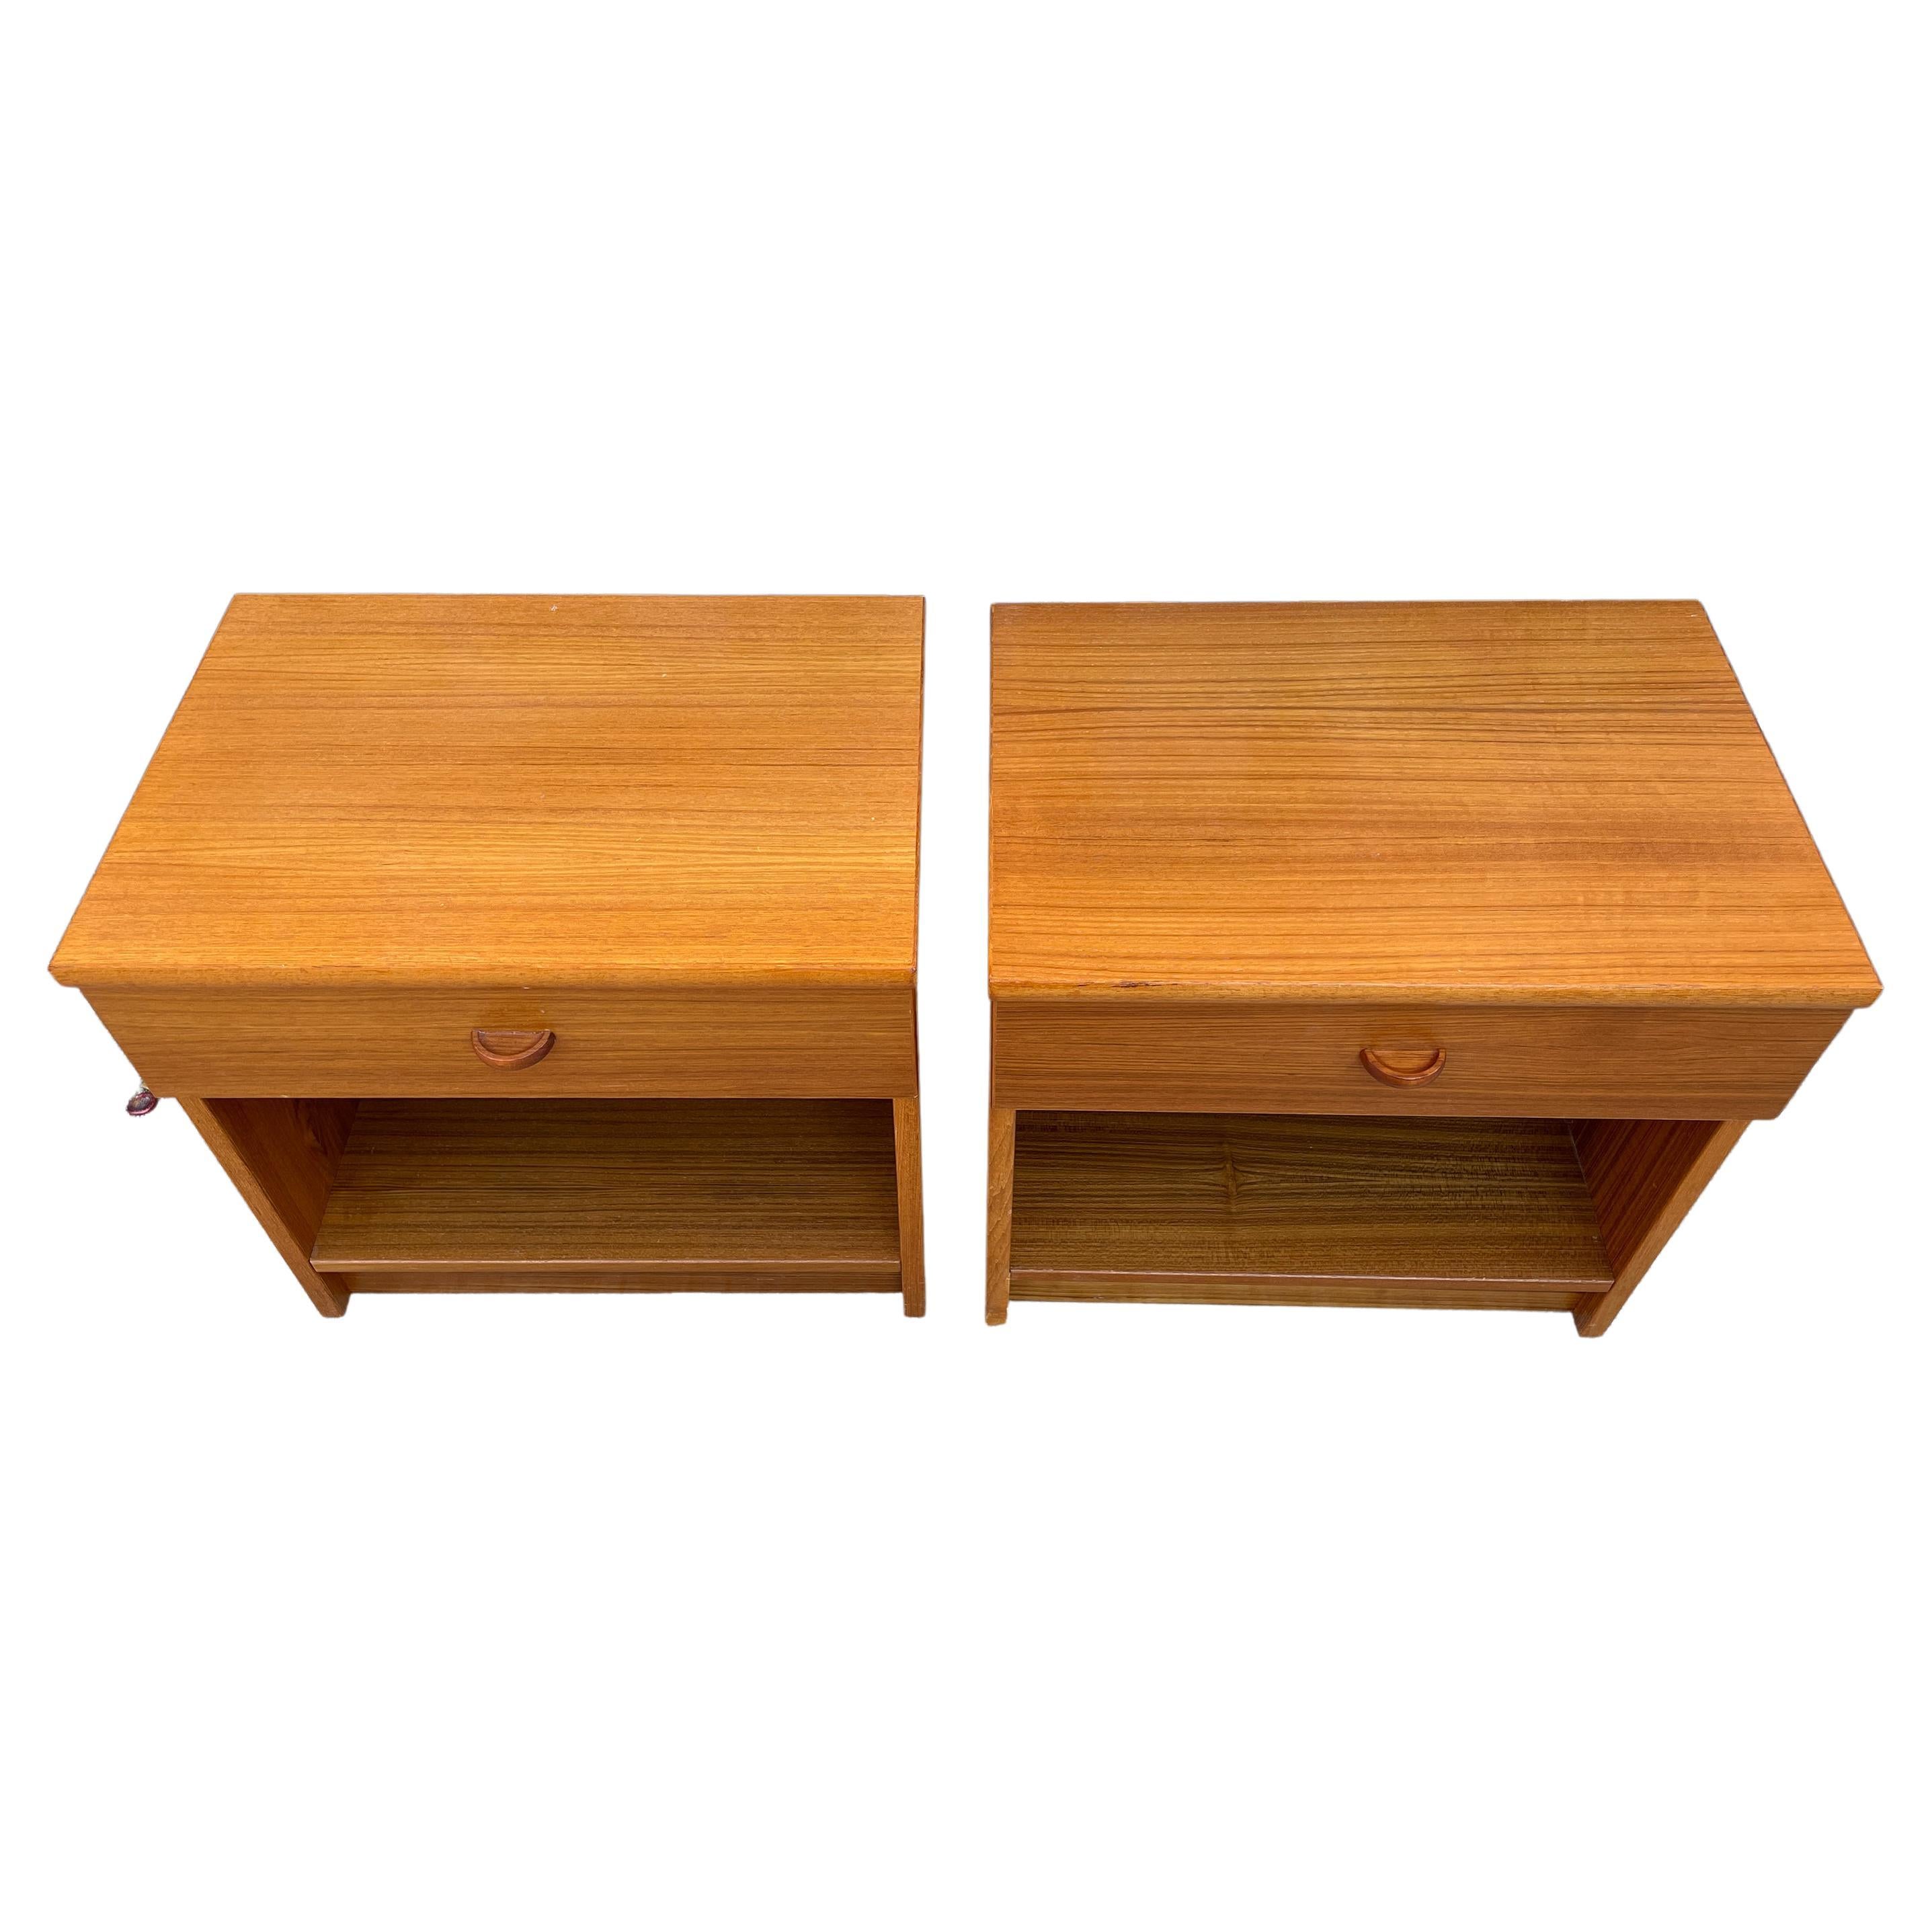 Beautiful pair of mid-century Danish modern teak single-drawer nightstands. Great simple design and great vintage condition - clean inside and out. Drawers slide smooth and with open space below drawer. Great light teak wood grain with solid teak